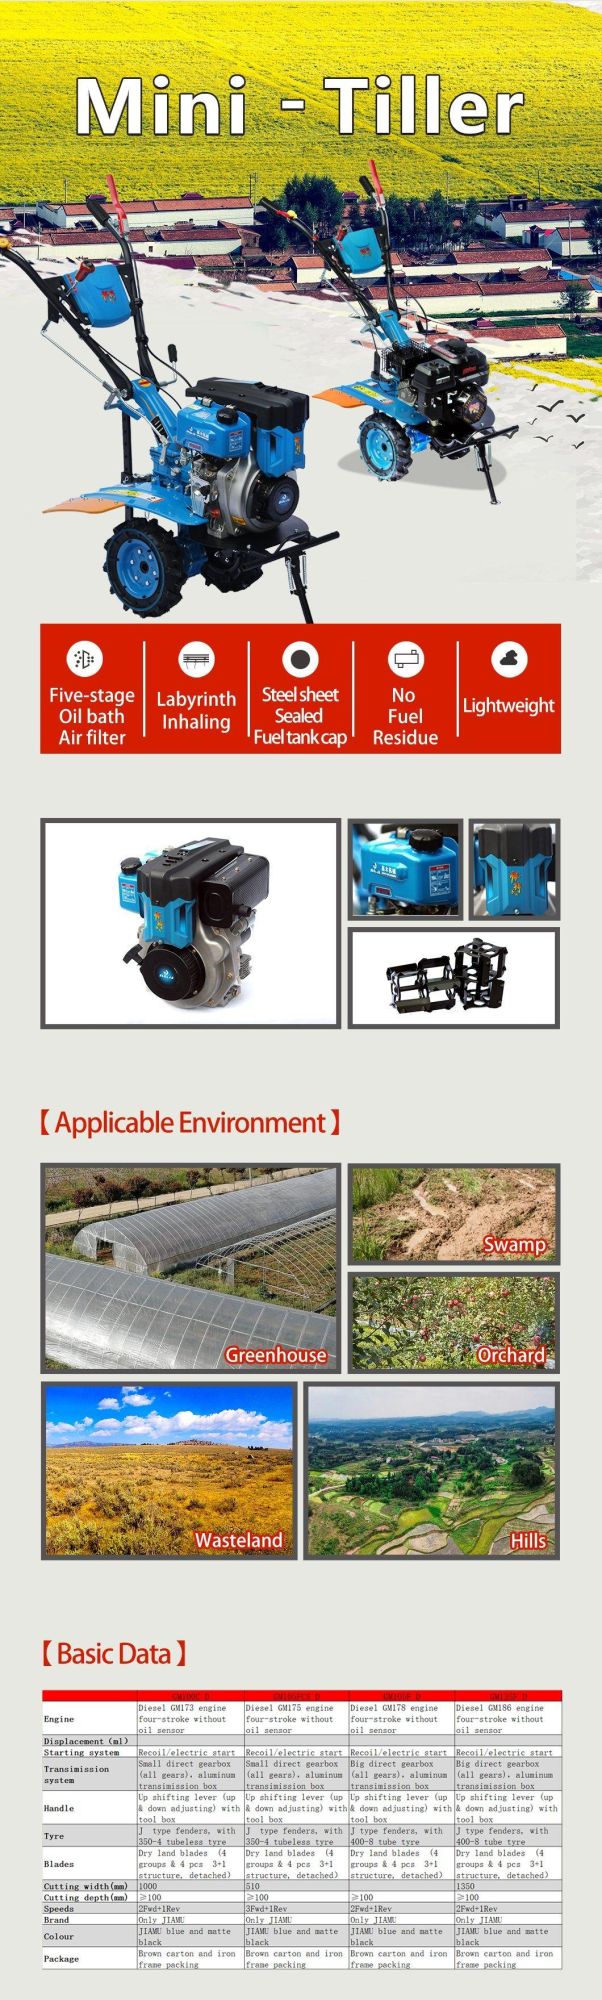 Jiamu GM135f D with GM186 All Gear Aluminum transmission Box Recoil Start Diesel D-Style Mini Cultivator Price for Sale